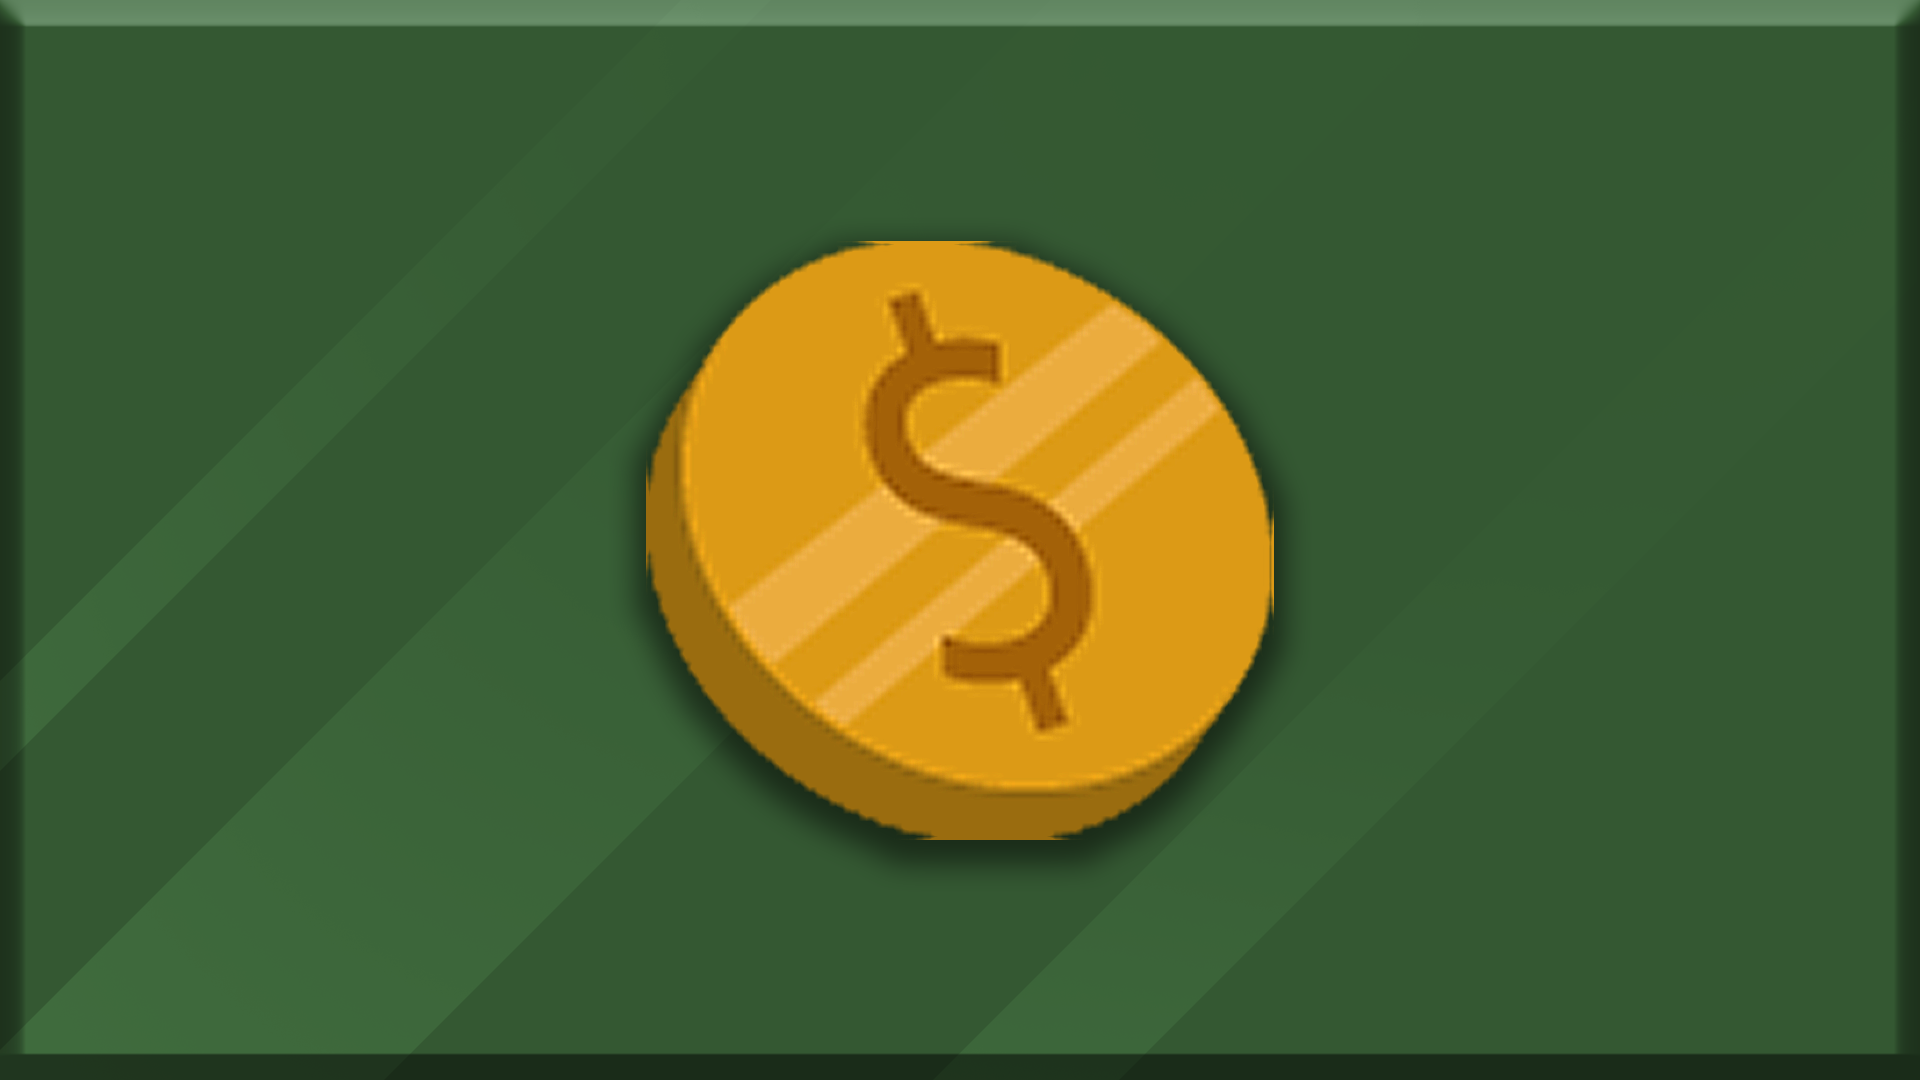 Icon for It's all about the money